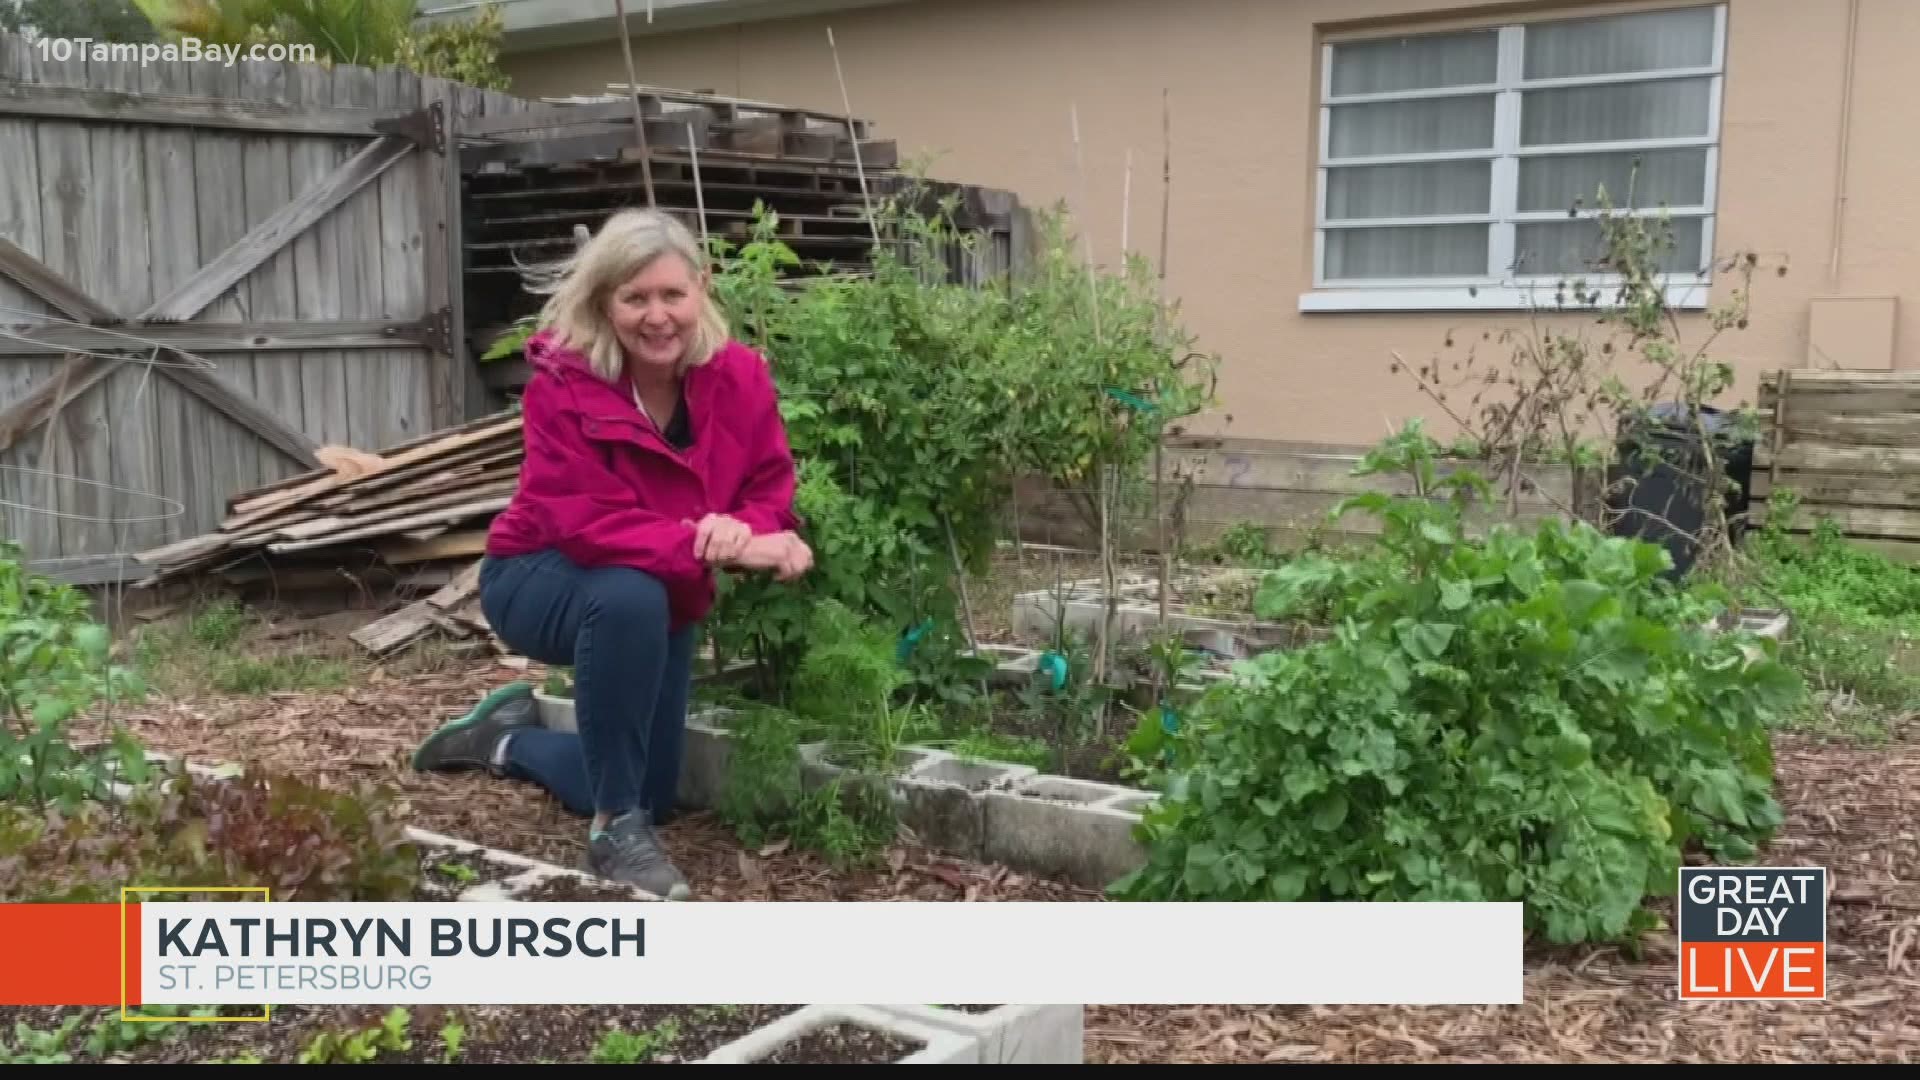 A $10,000 grant from 10 Tampa Bay and the TEGNA Foundation help kids create a community garden.